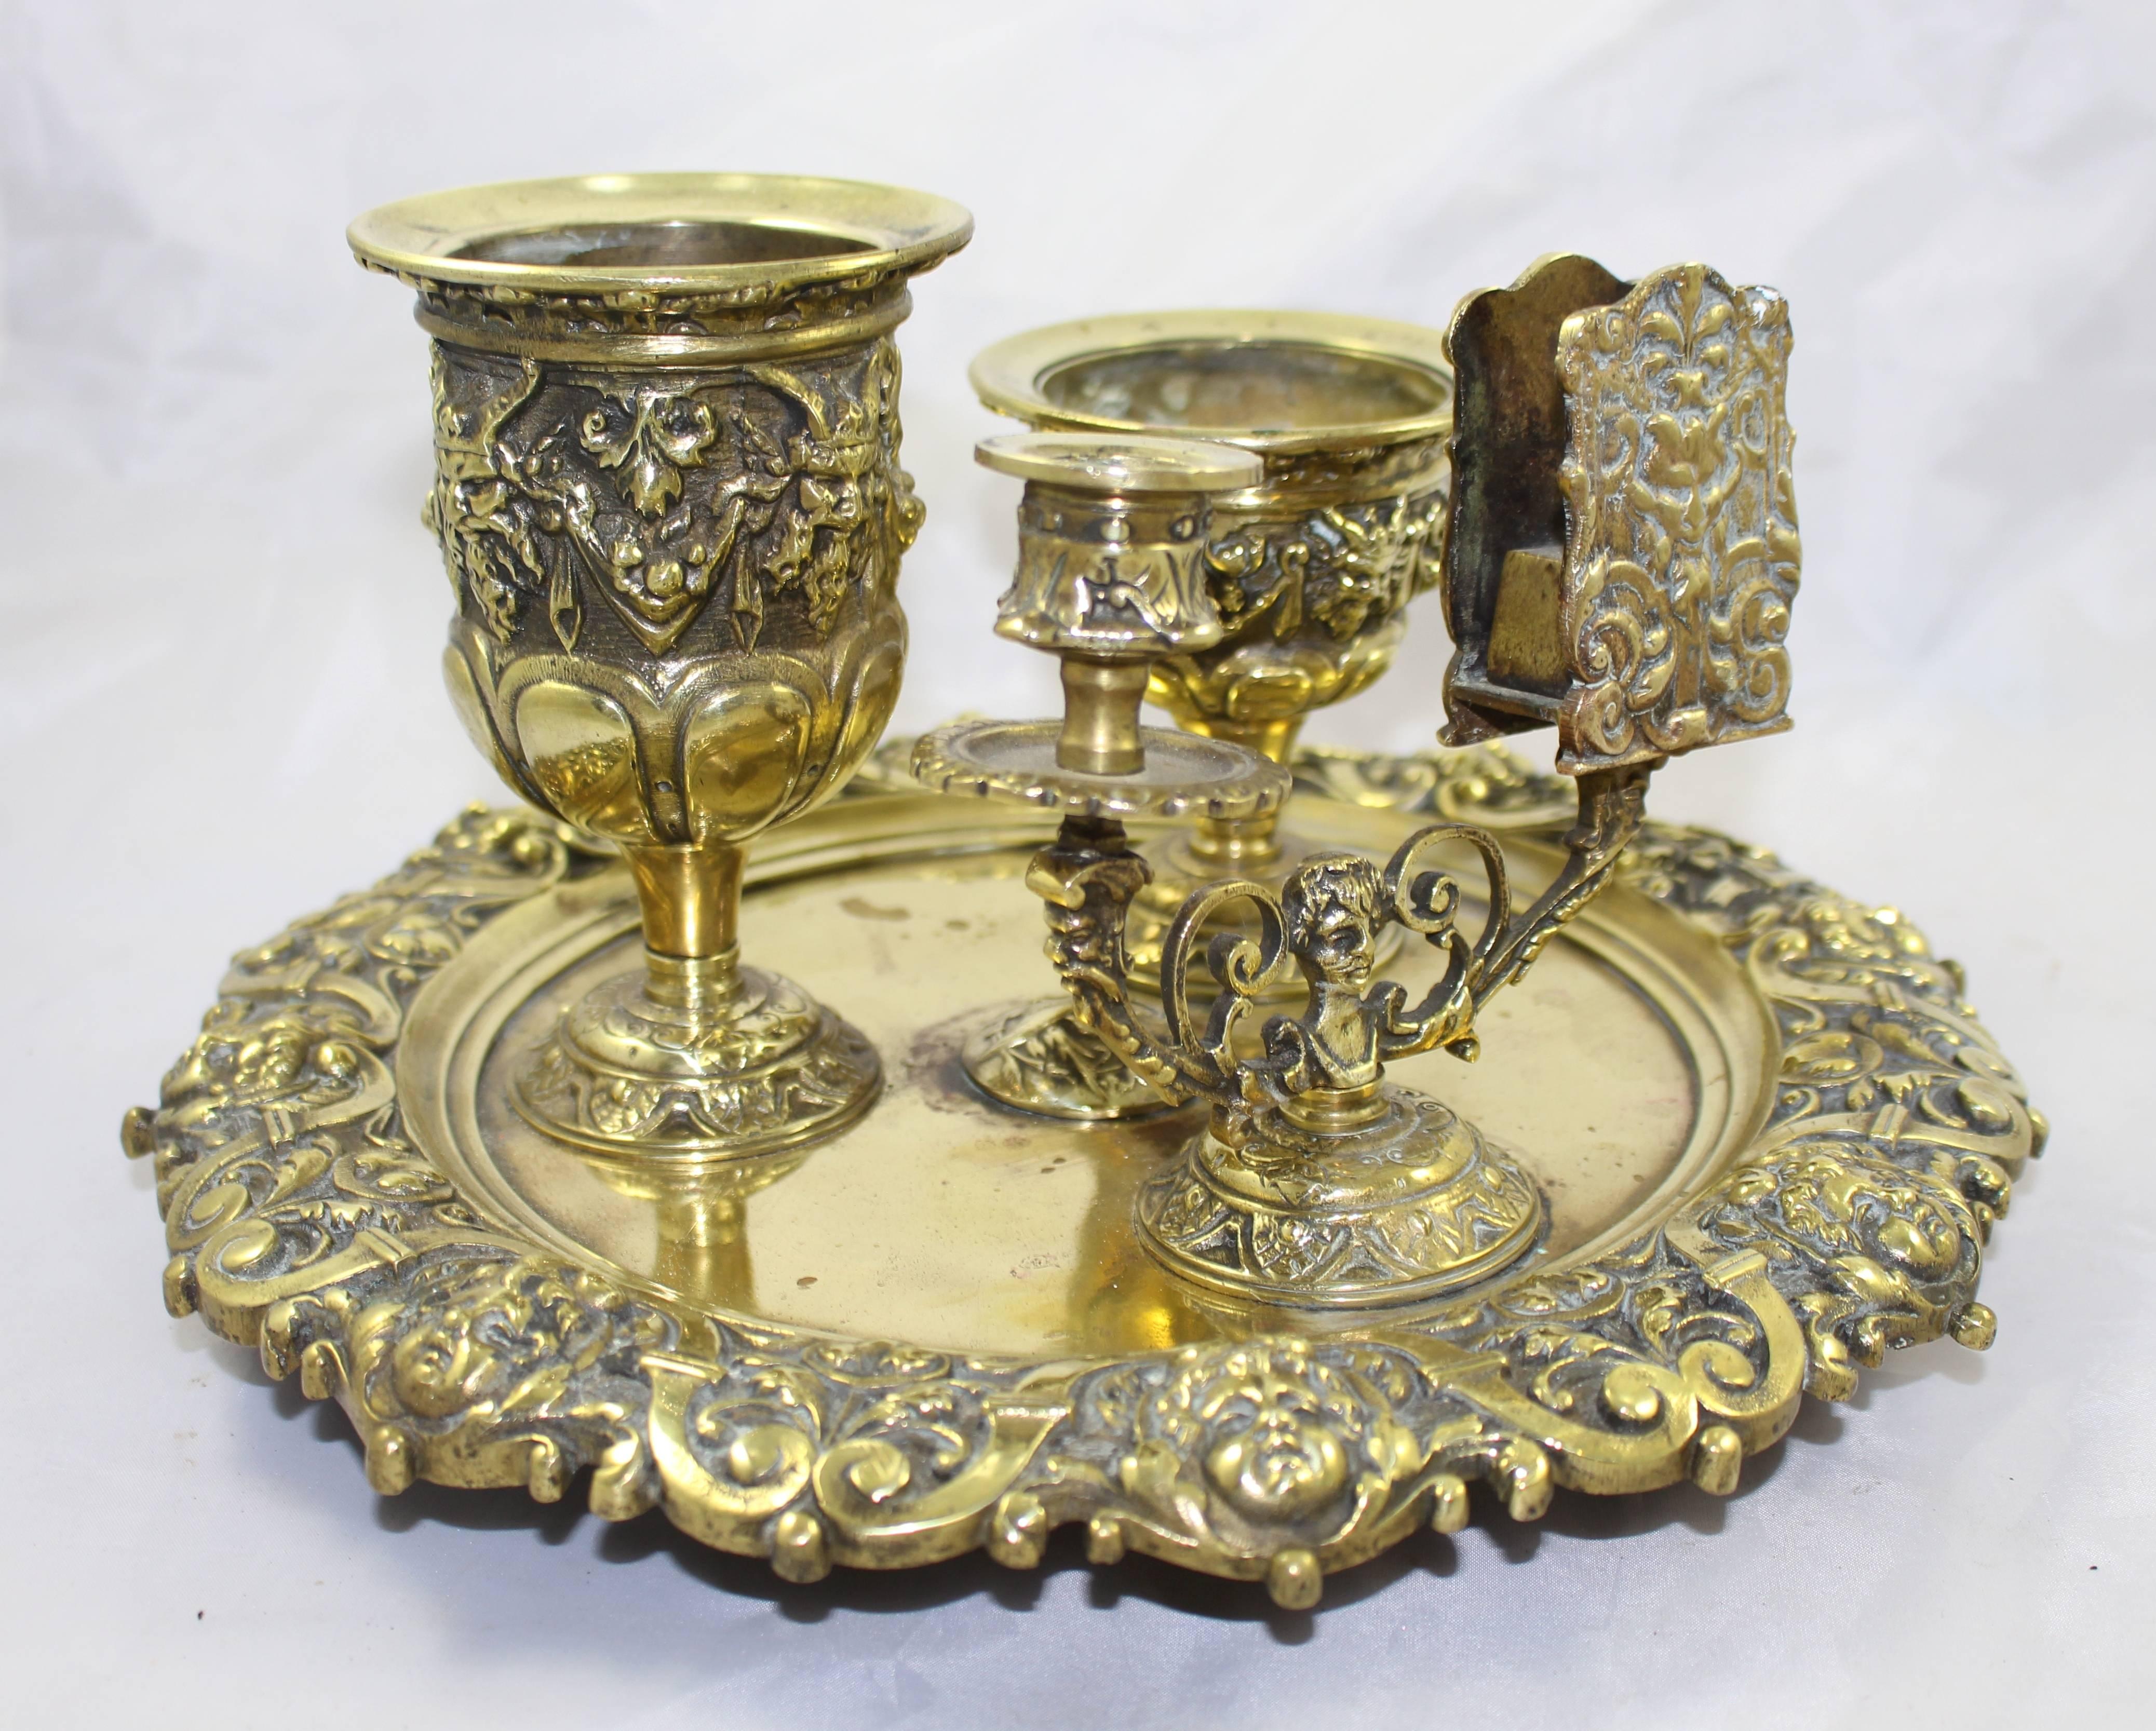 Period 19th century.
Composition brass.
Measures: Diameter 29 cm / 11 1/4 in,
height 15 cm / 6 in.
Condition Very good condition commensurate with age.

Antique Victorian brass desk set

Free UK Mainland Delivery.

Please enquire for